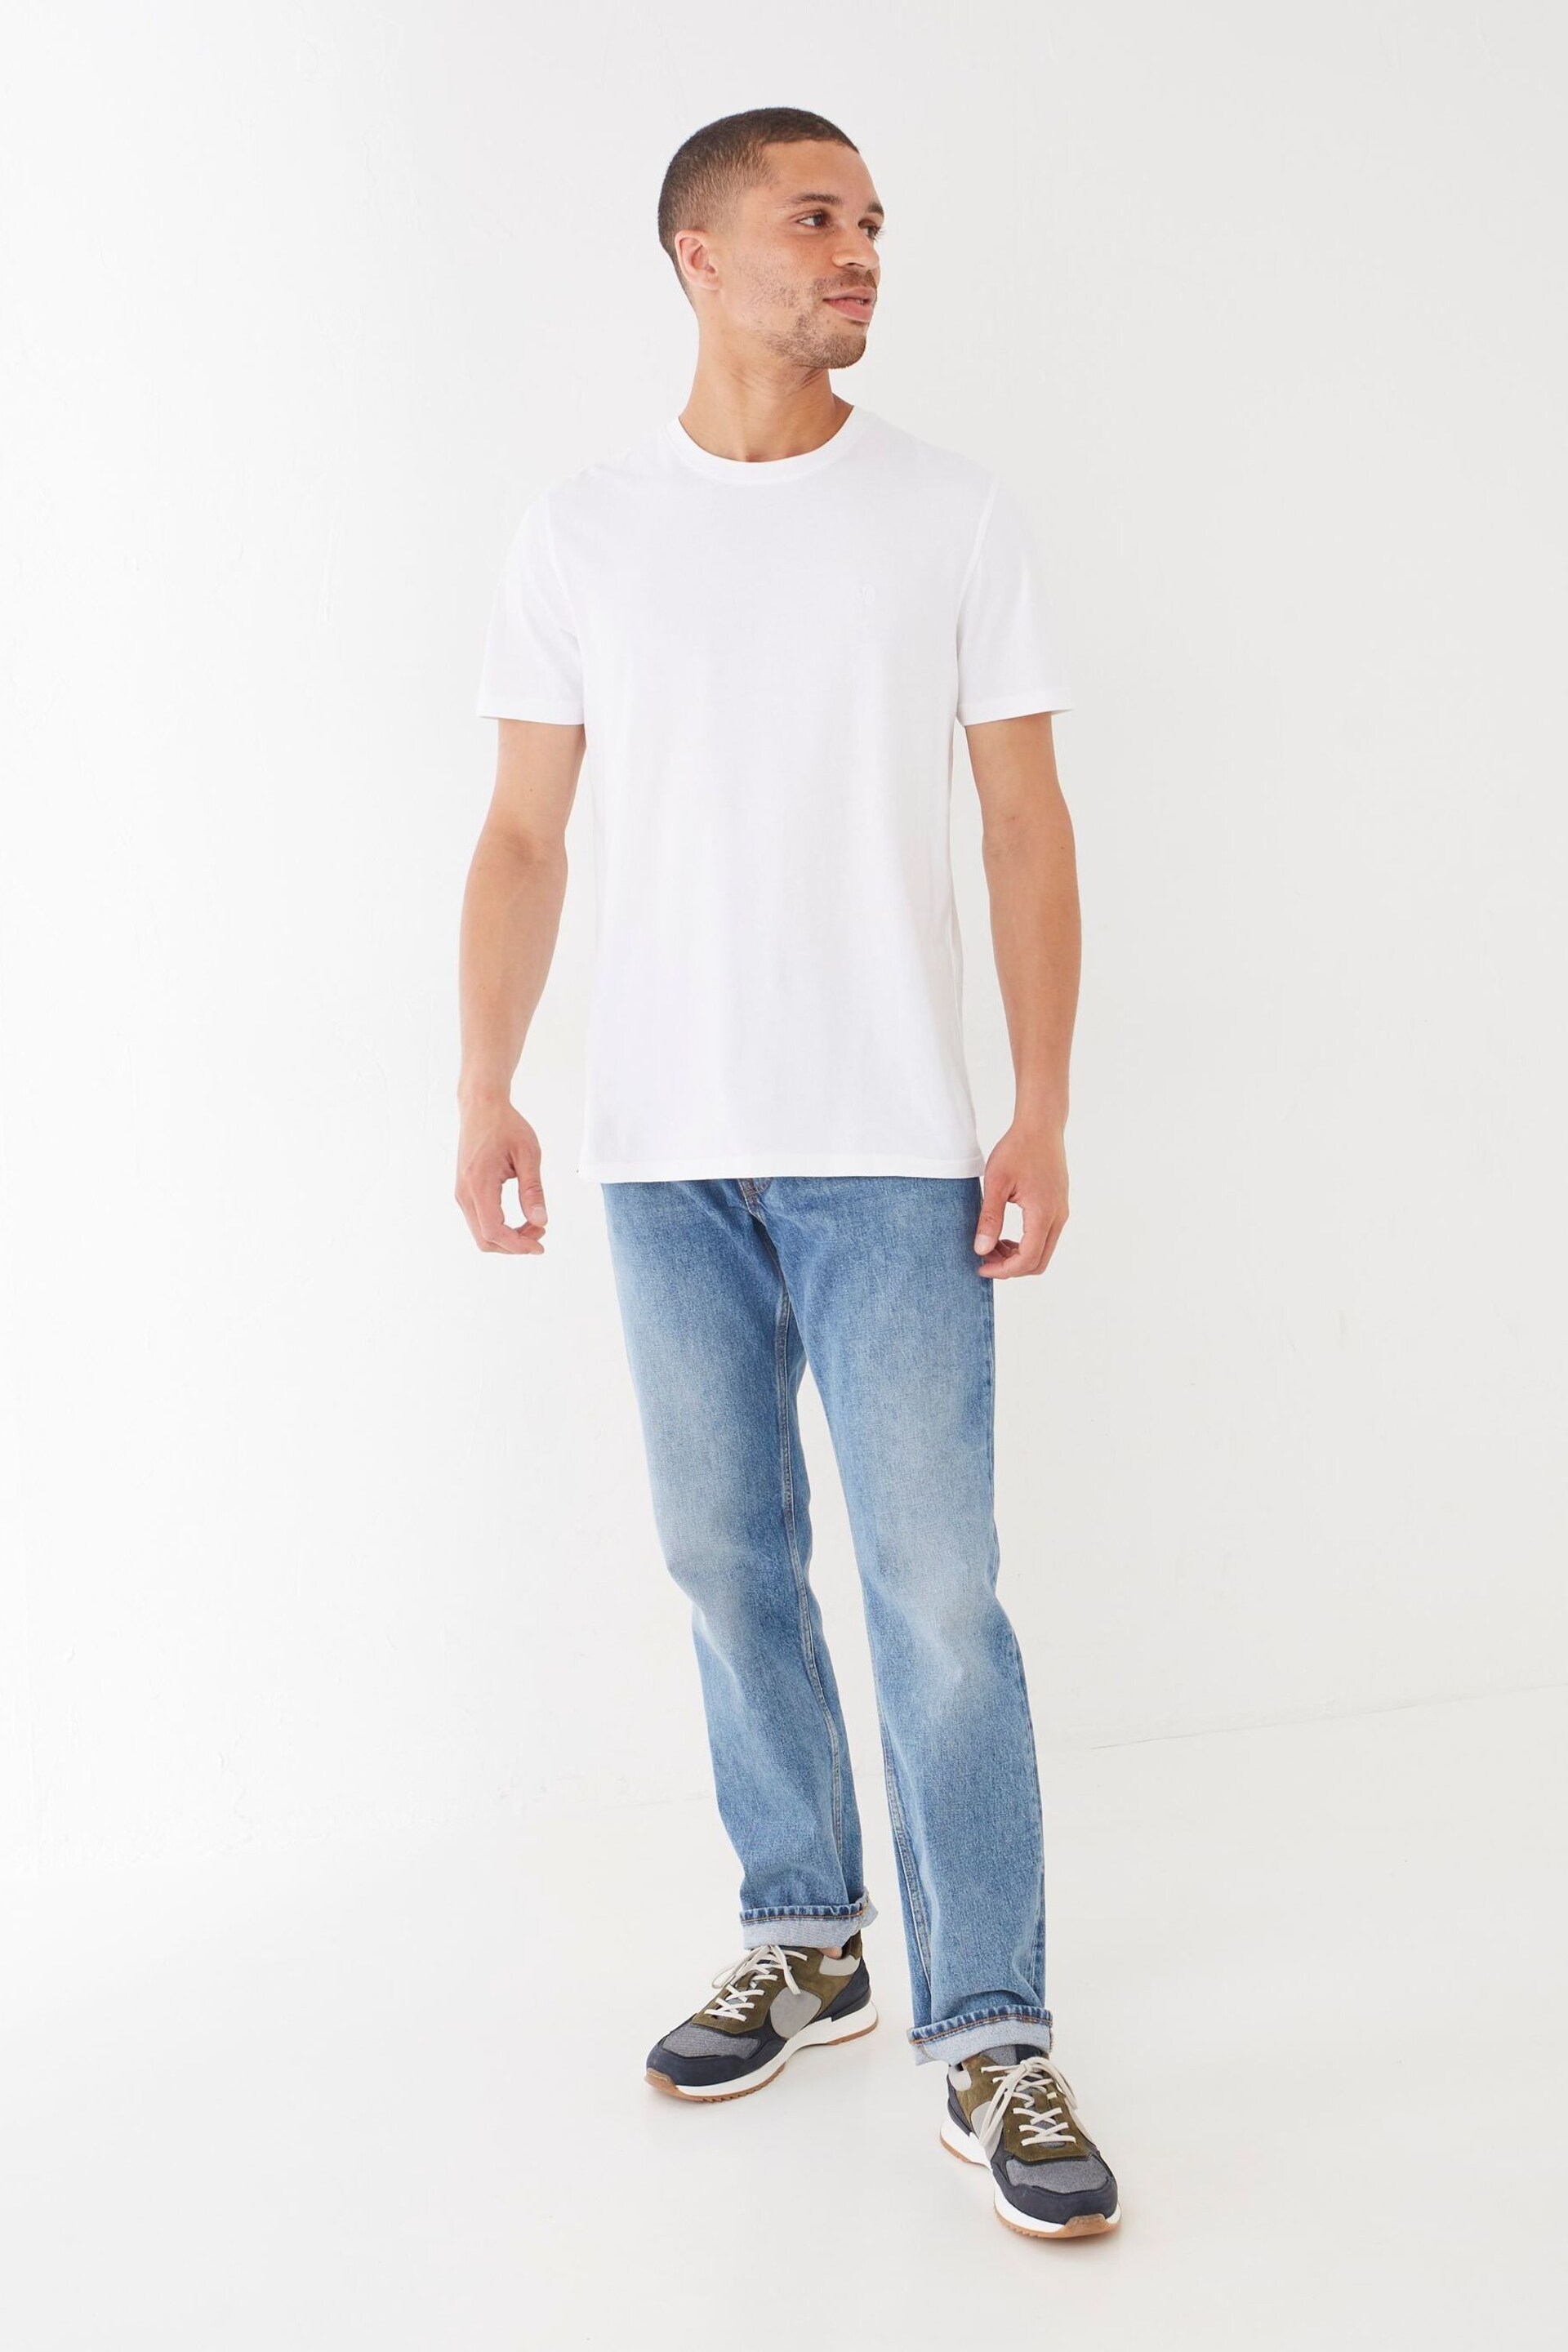 FatFace White Lulworth T-Shirt - Image 3 of 5